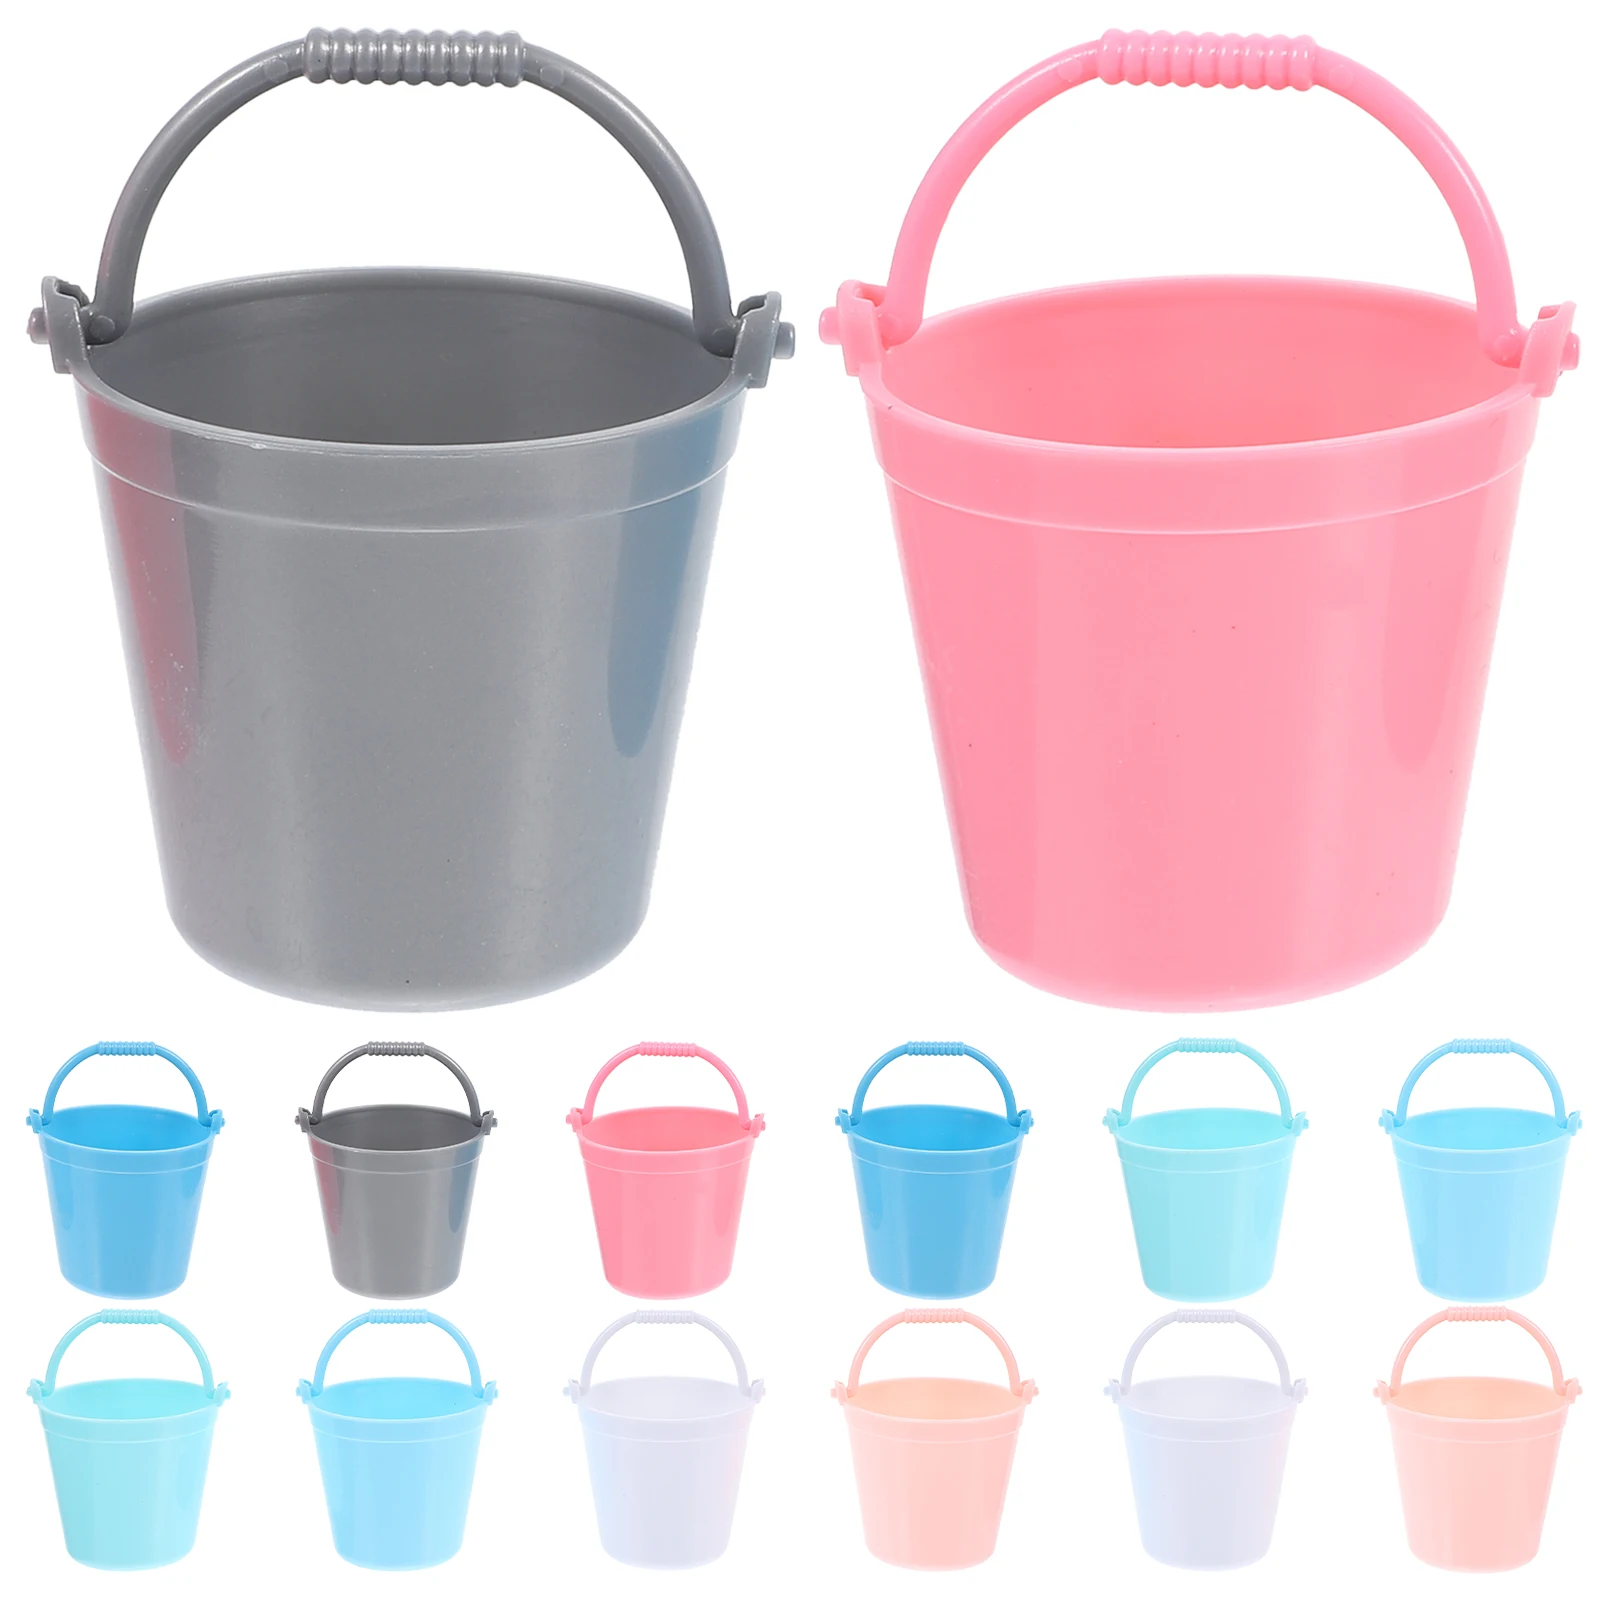 

Dollhouse Miniature Water Bucket Model Sand Bucket Toy For Pretend Play Dollhouse Furniture Decoration Toys Random Color